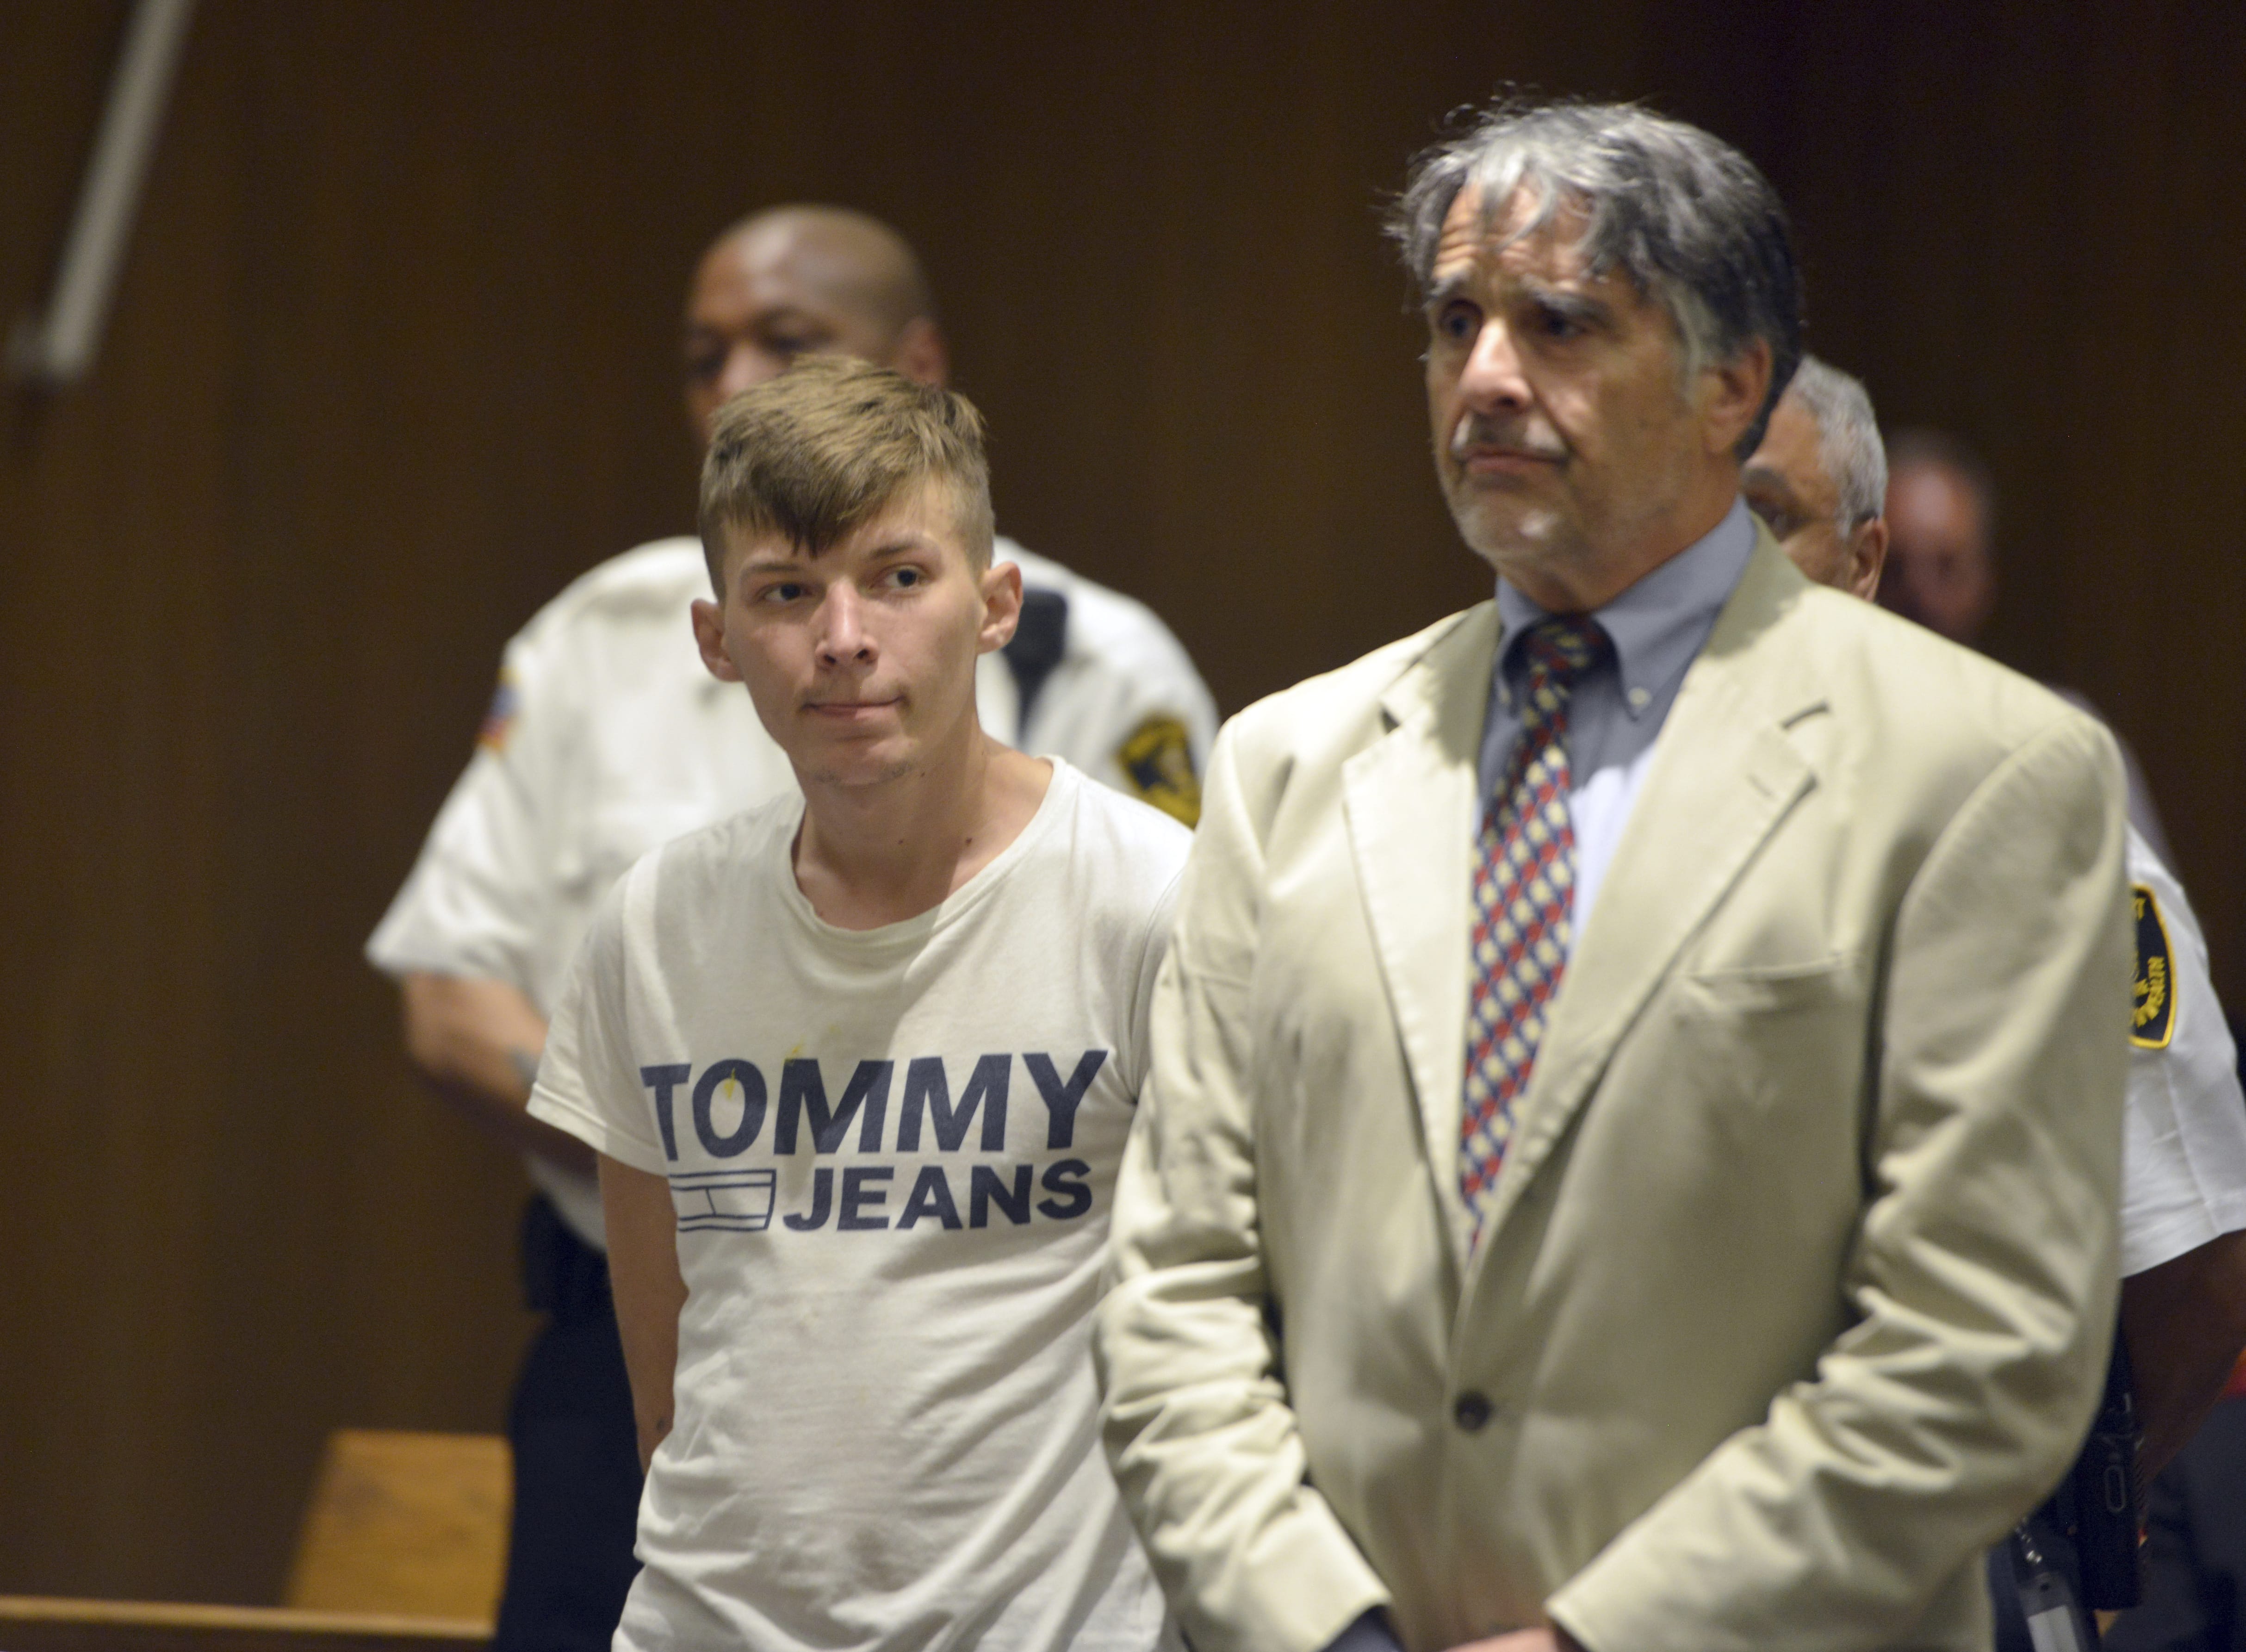 Volodymyr Zhukovskyy, 23, of West Springfield, stands with his attorney Donald Frank during his arraignment in Springfield District Court, Monday, June 24, 2019, in Springfield, Mass. Zhukovskyy, the driver of a truck in a fiery collision on a rural New Hampshire highway that killed seven motorcyclists, was charged Monday with seven counts of negligent homicide.